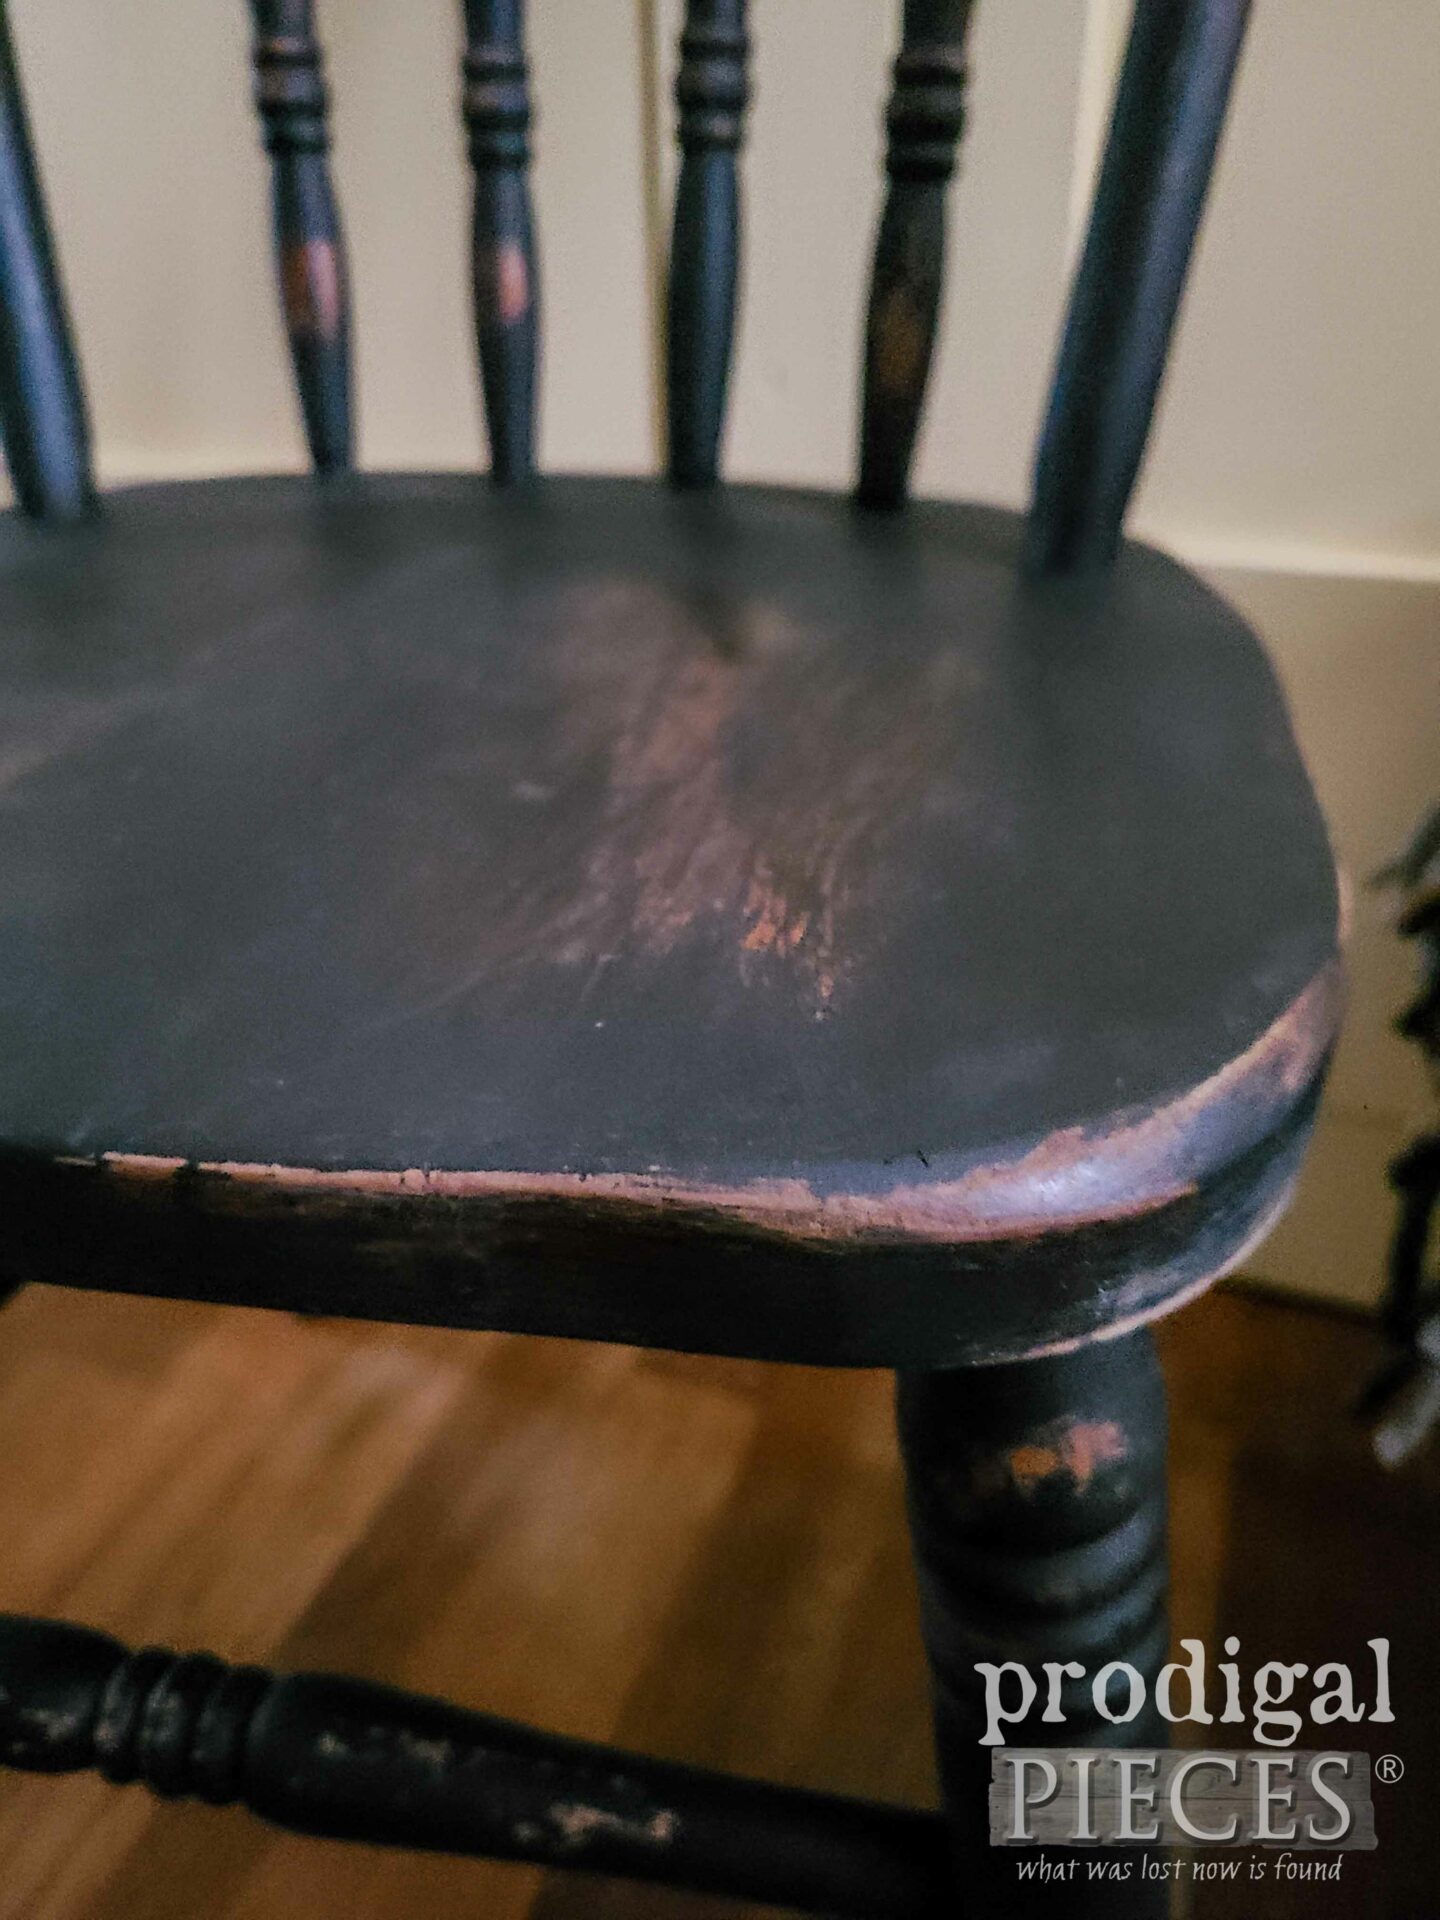 Wet Distressed Antique Child's Chairs in Windsor Style by Larissa of Prodigal Pieces | prodigalpieces.com #prodigalpieces #antiuqe #farmhouse